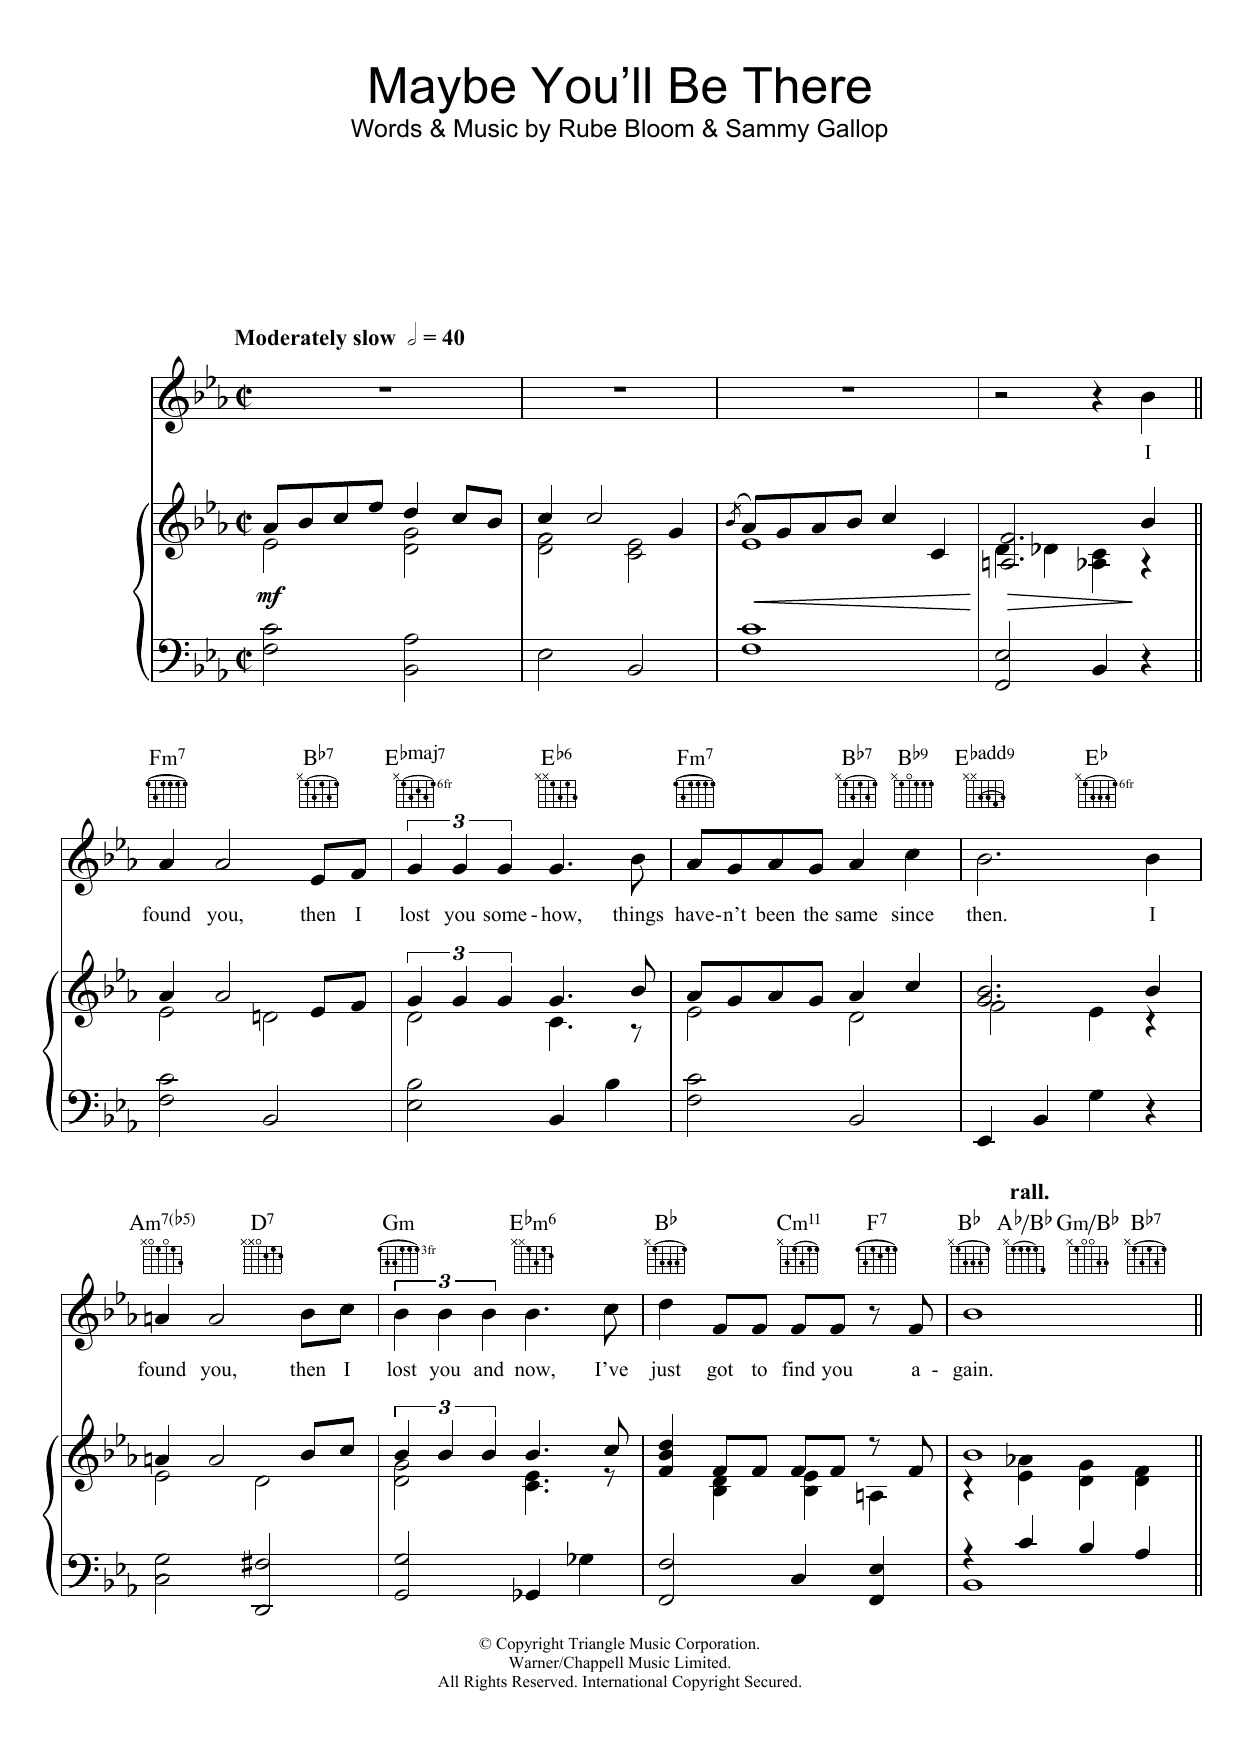 Download Frank Sinatra Maybe You'll Be There Sheet Music